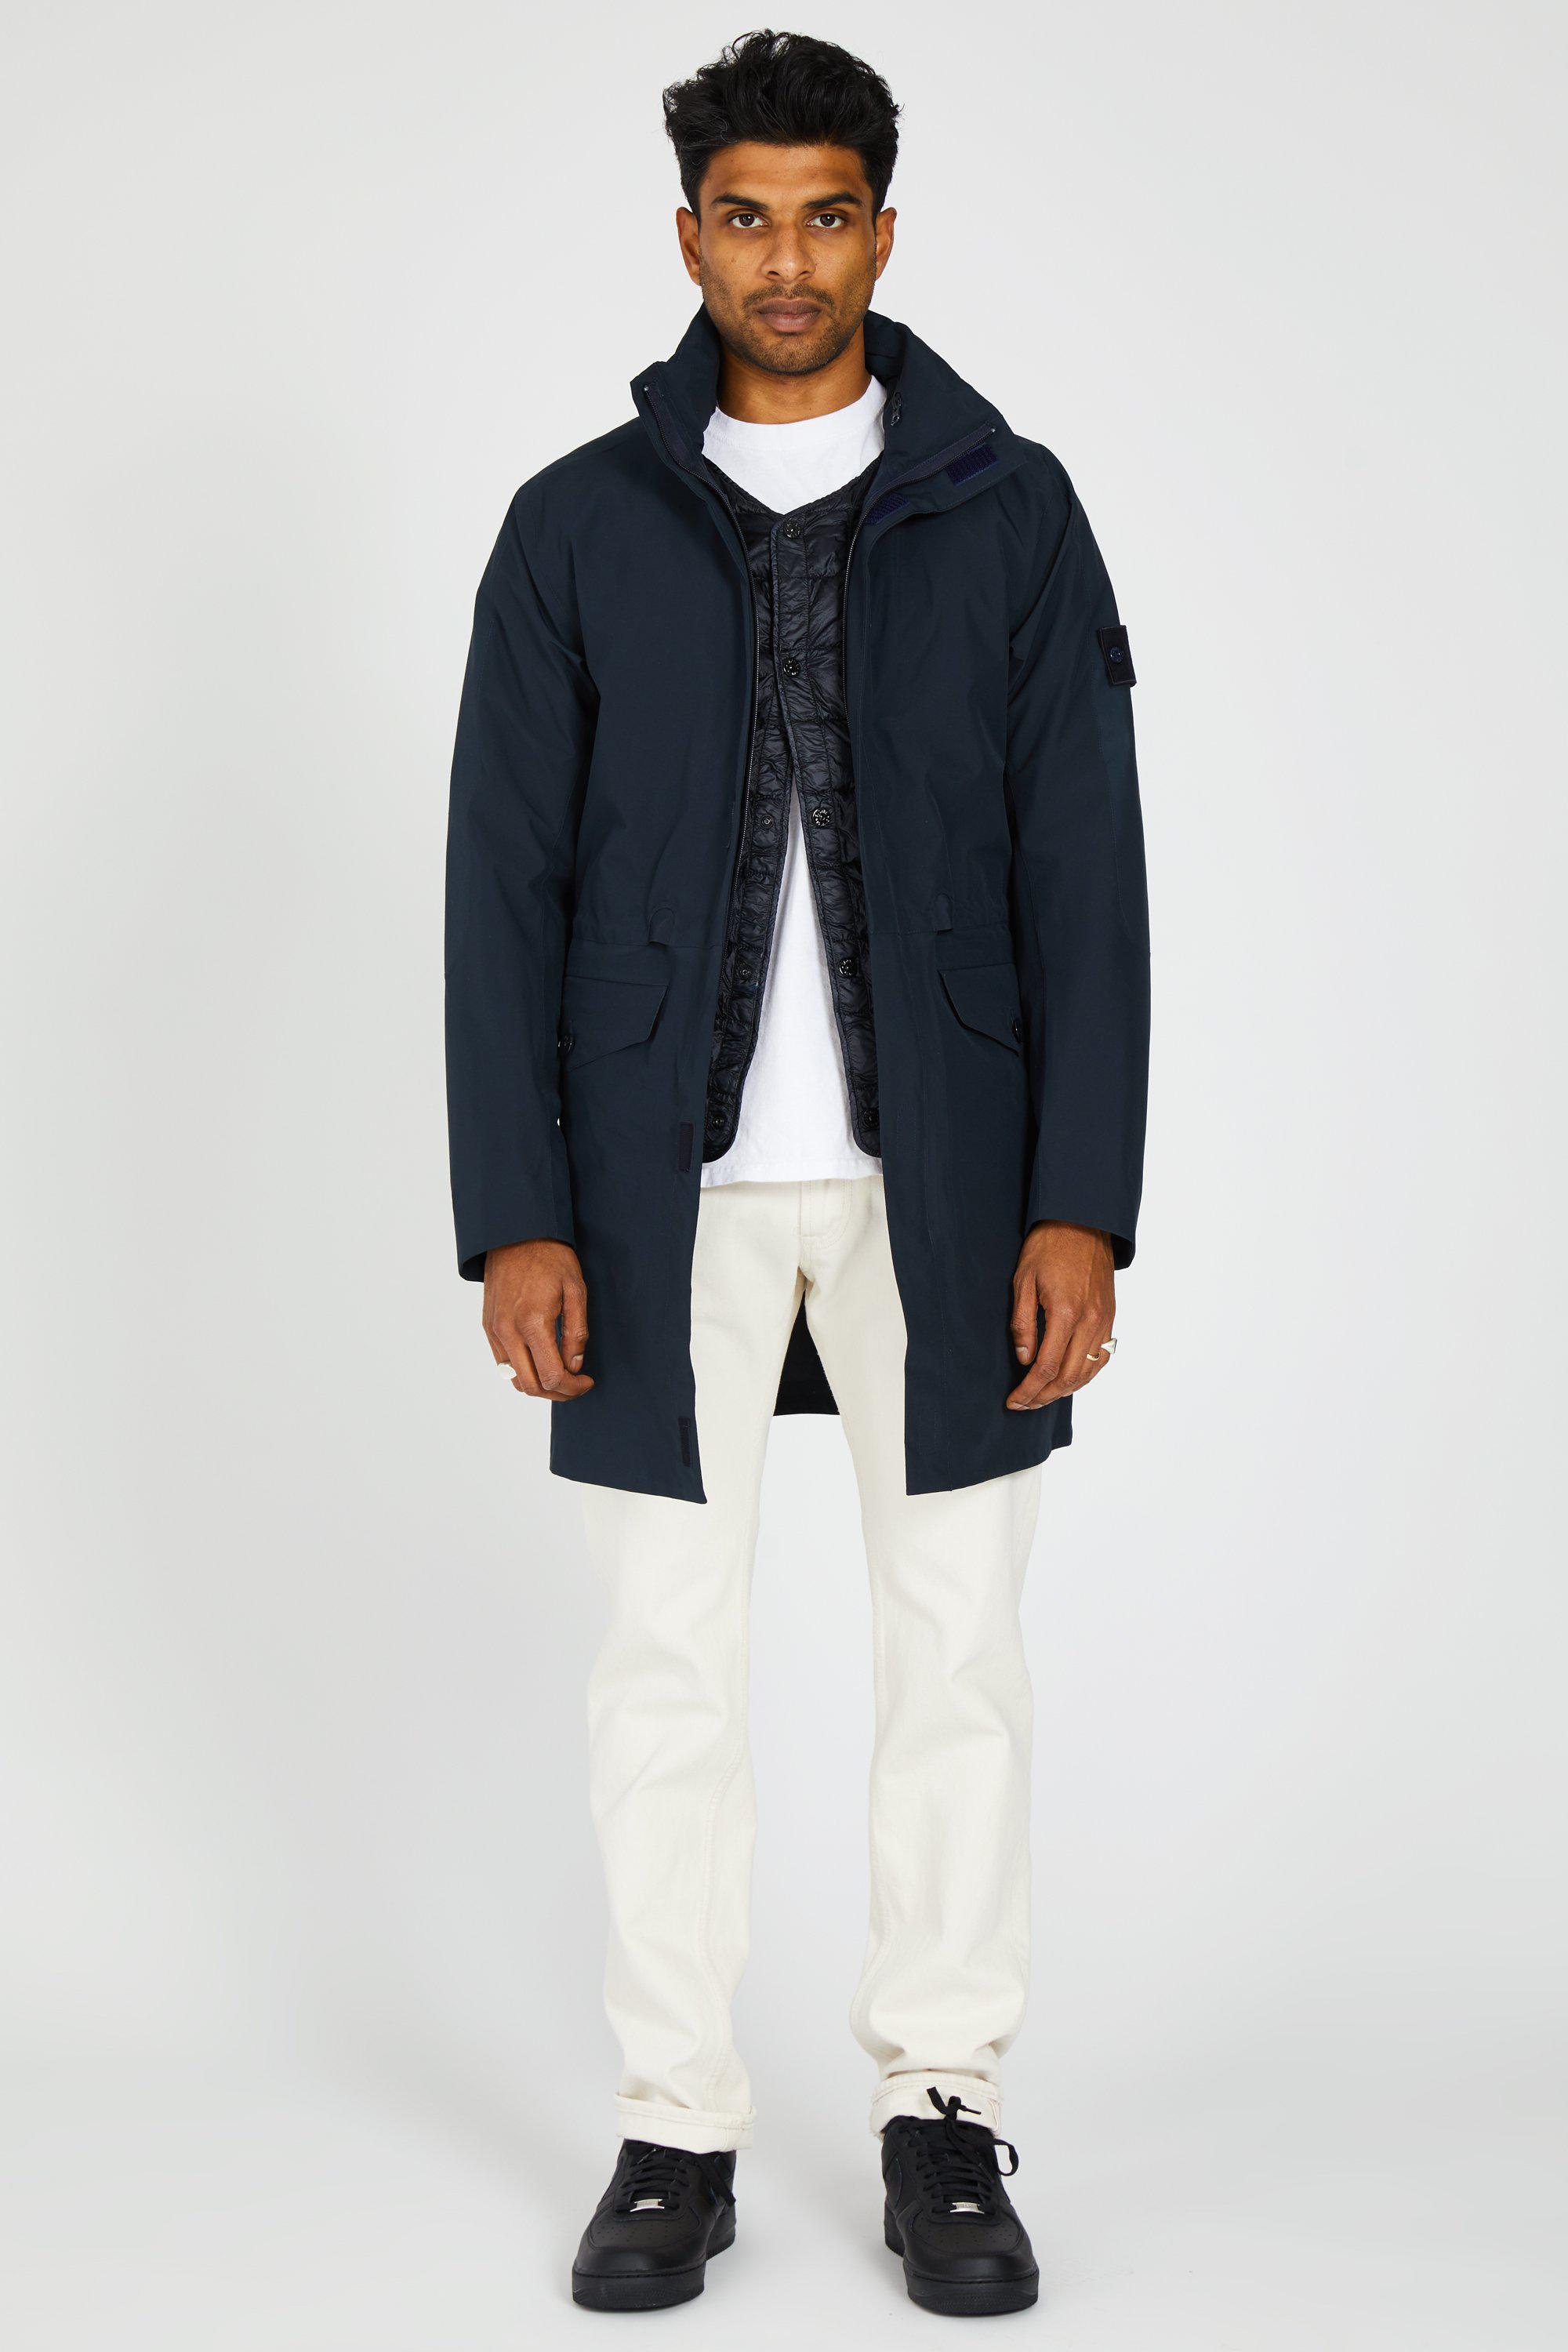 Stone Island 70329 Tank Shield Ghost Parka W/ Insulated Liner in Blue Grey  (Blue) for Men - Lyst